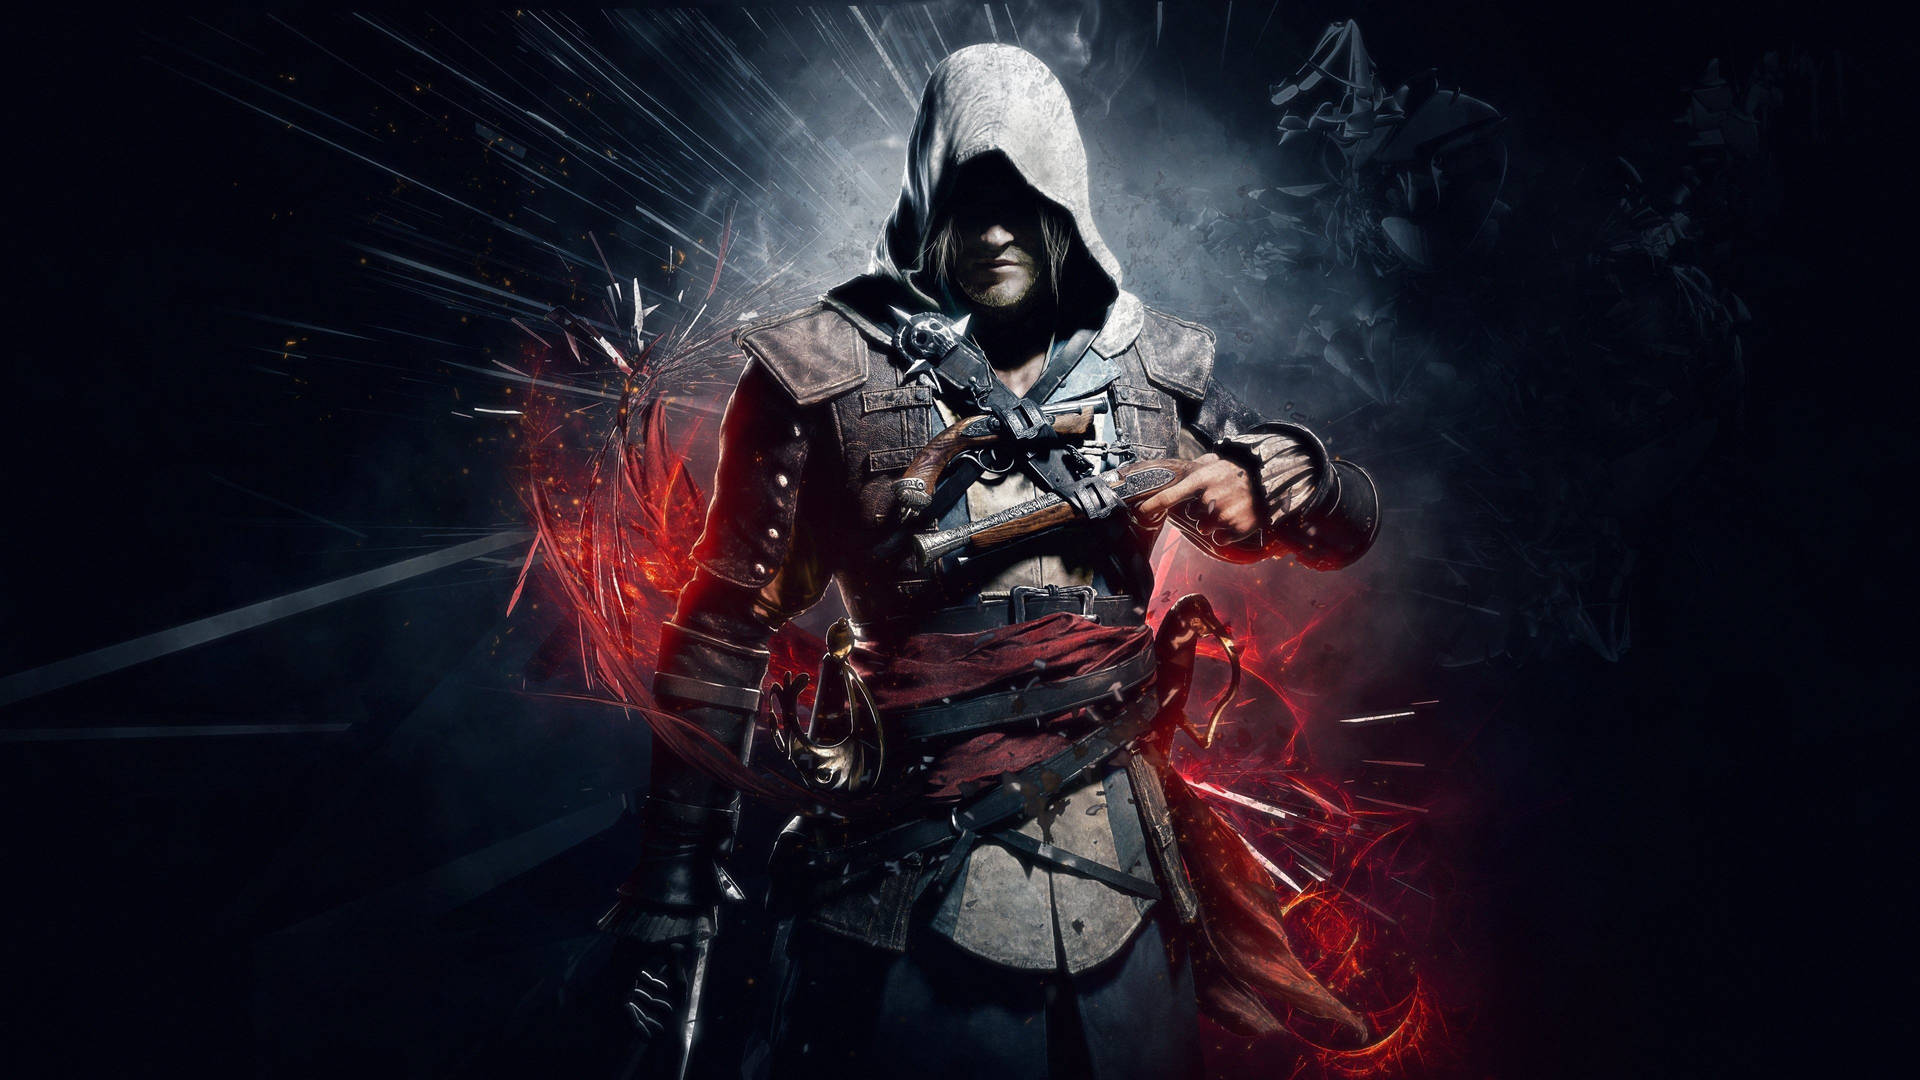 Hd Assassin's Creed Gaming Cover Background